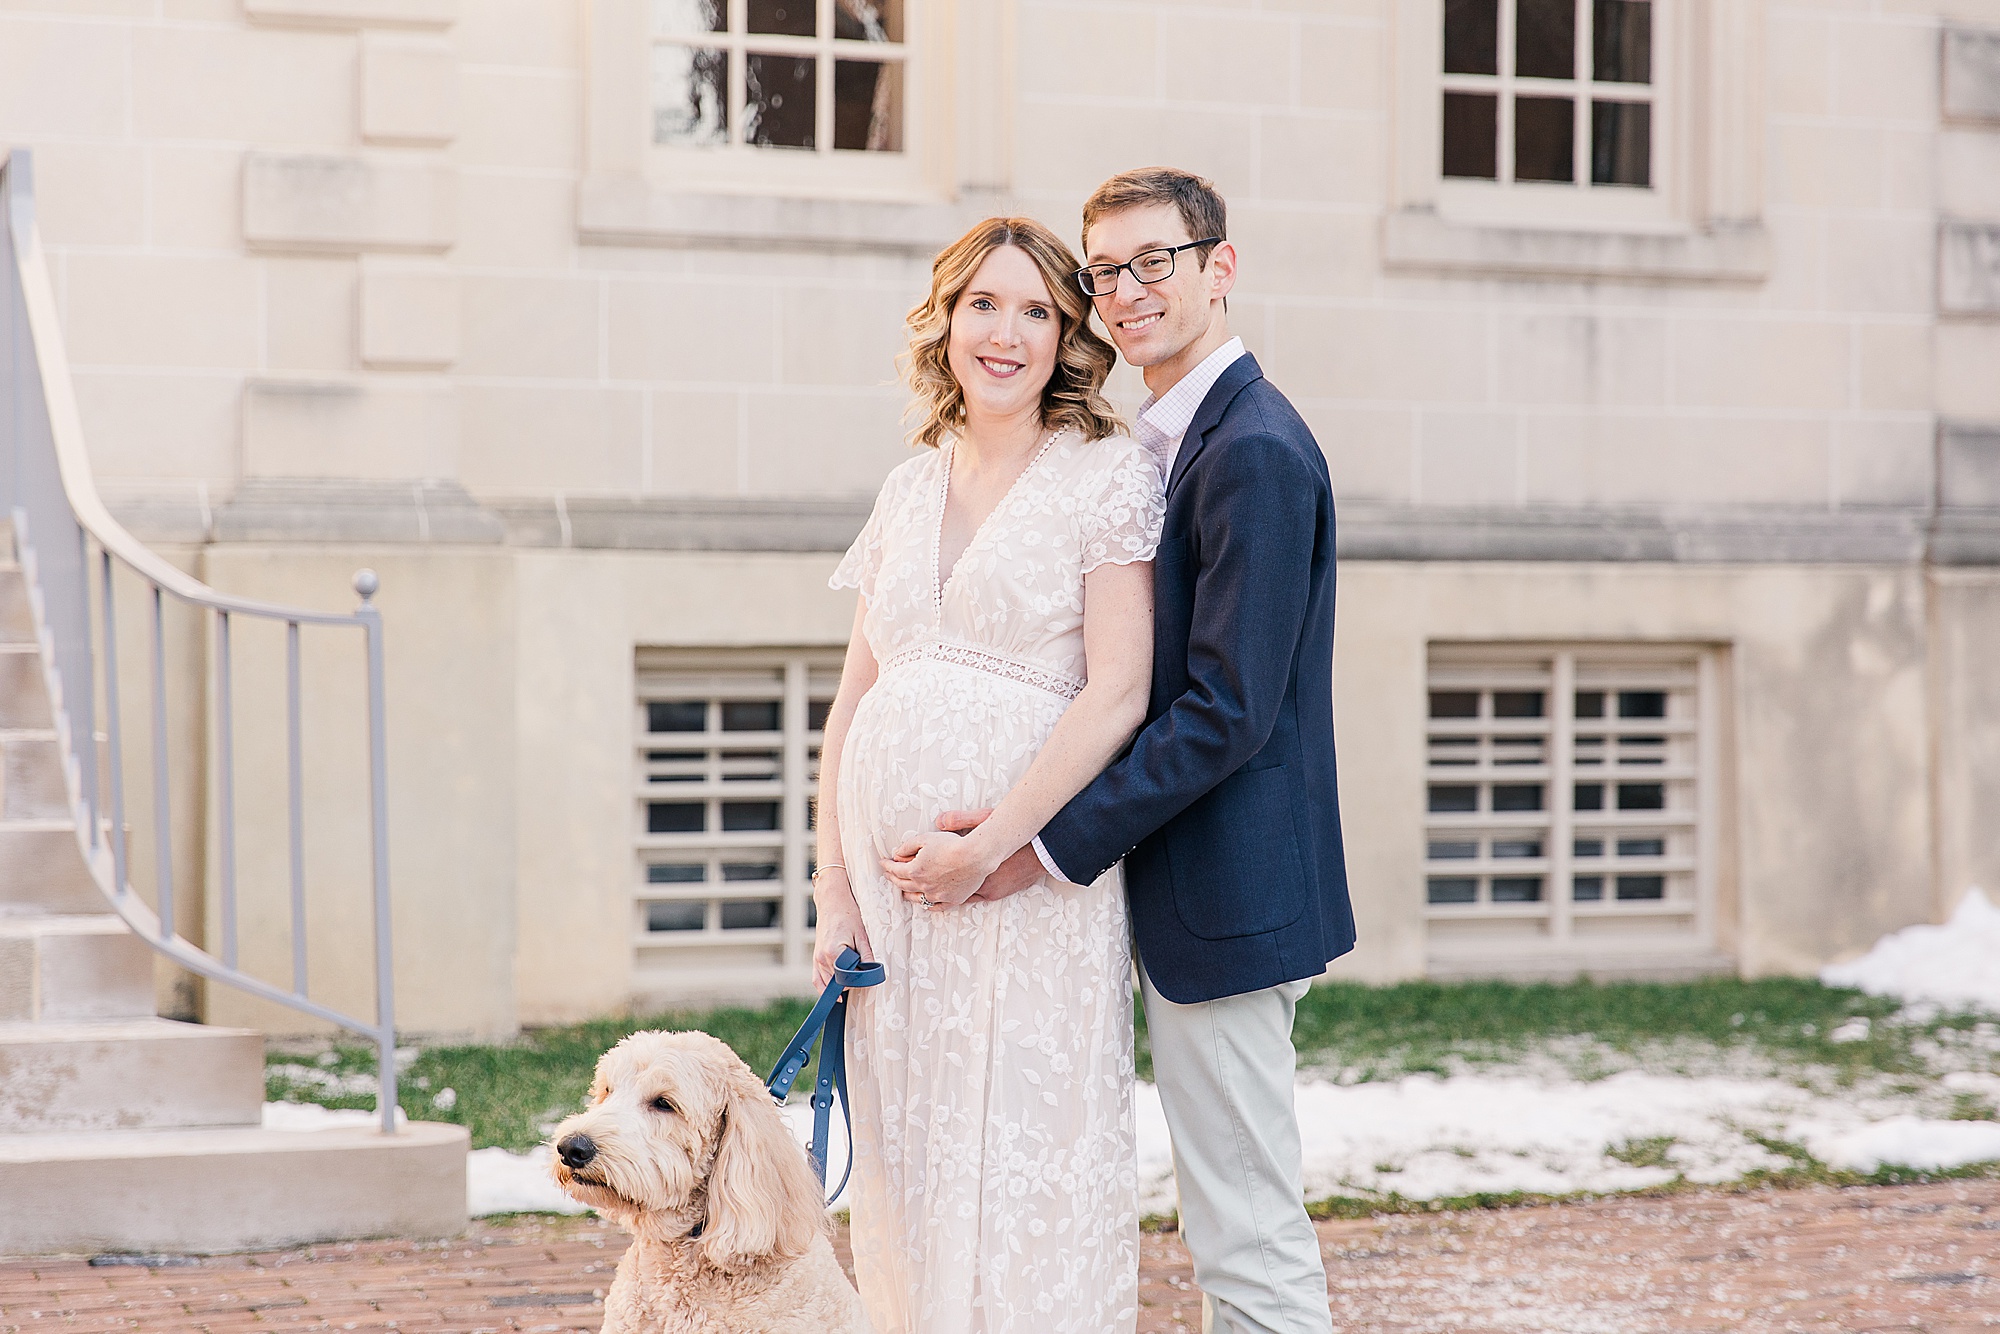 parents hug outside building  during maternity photos in Historic Alexandria VA